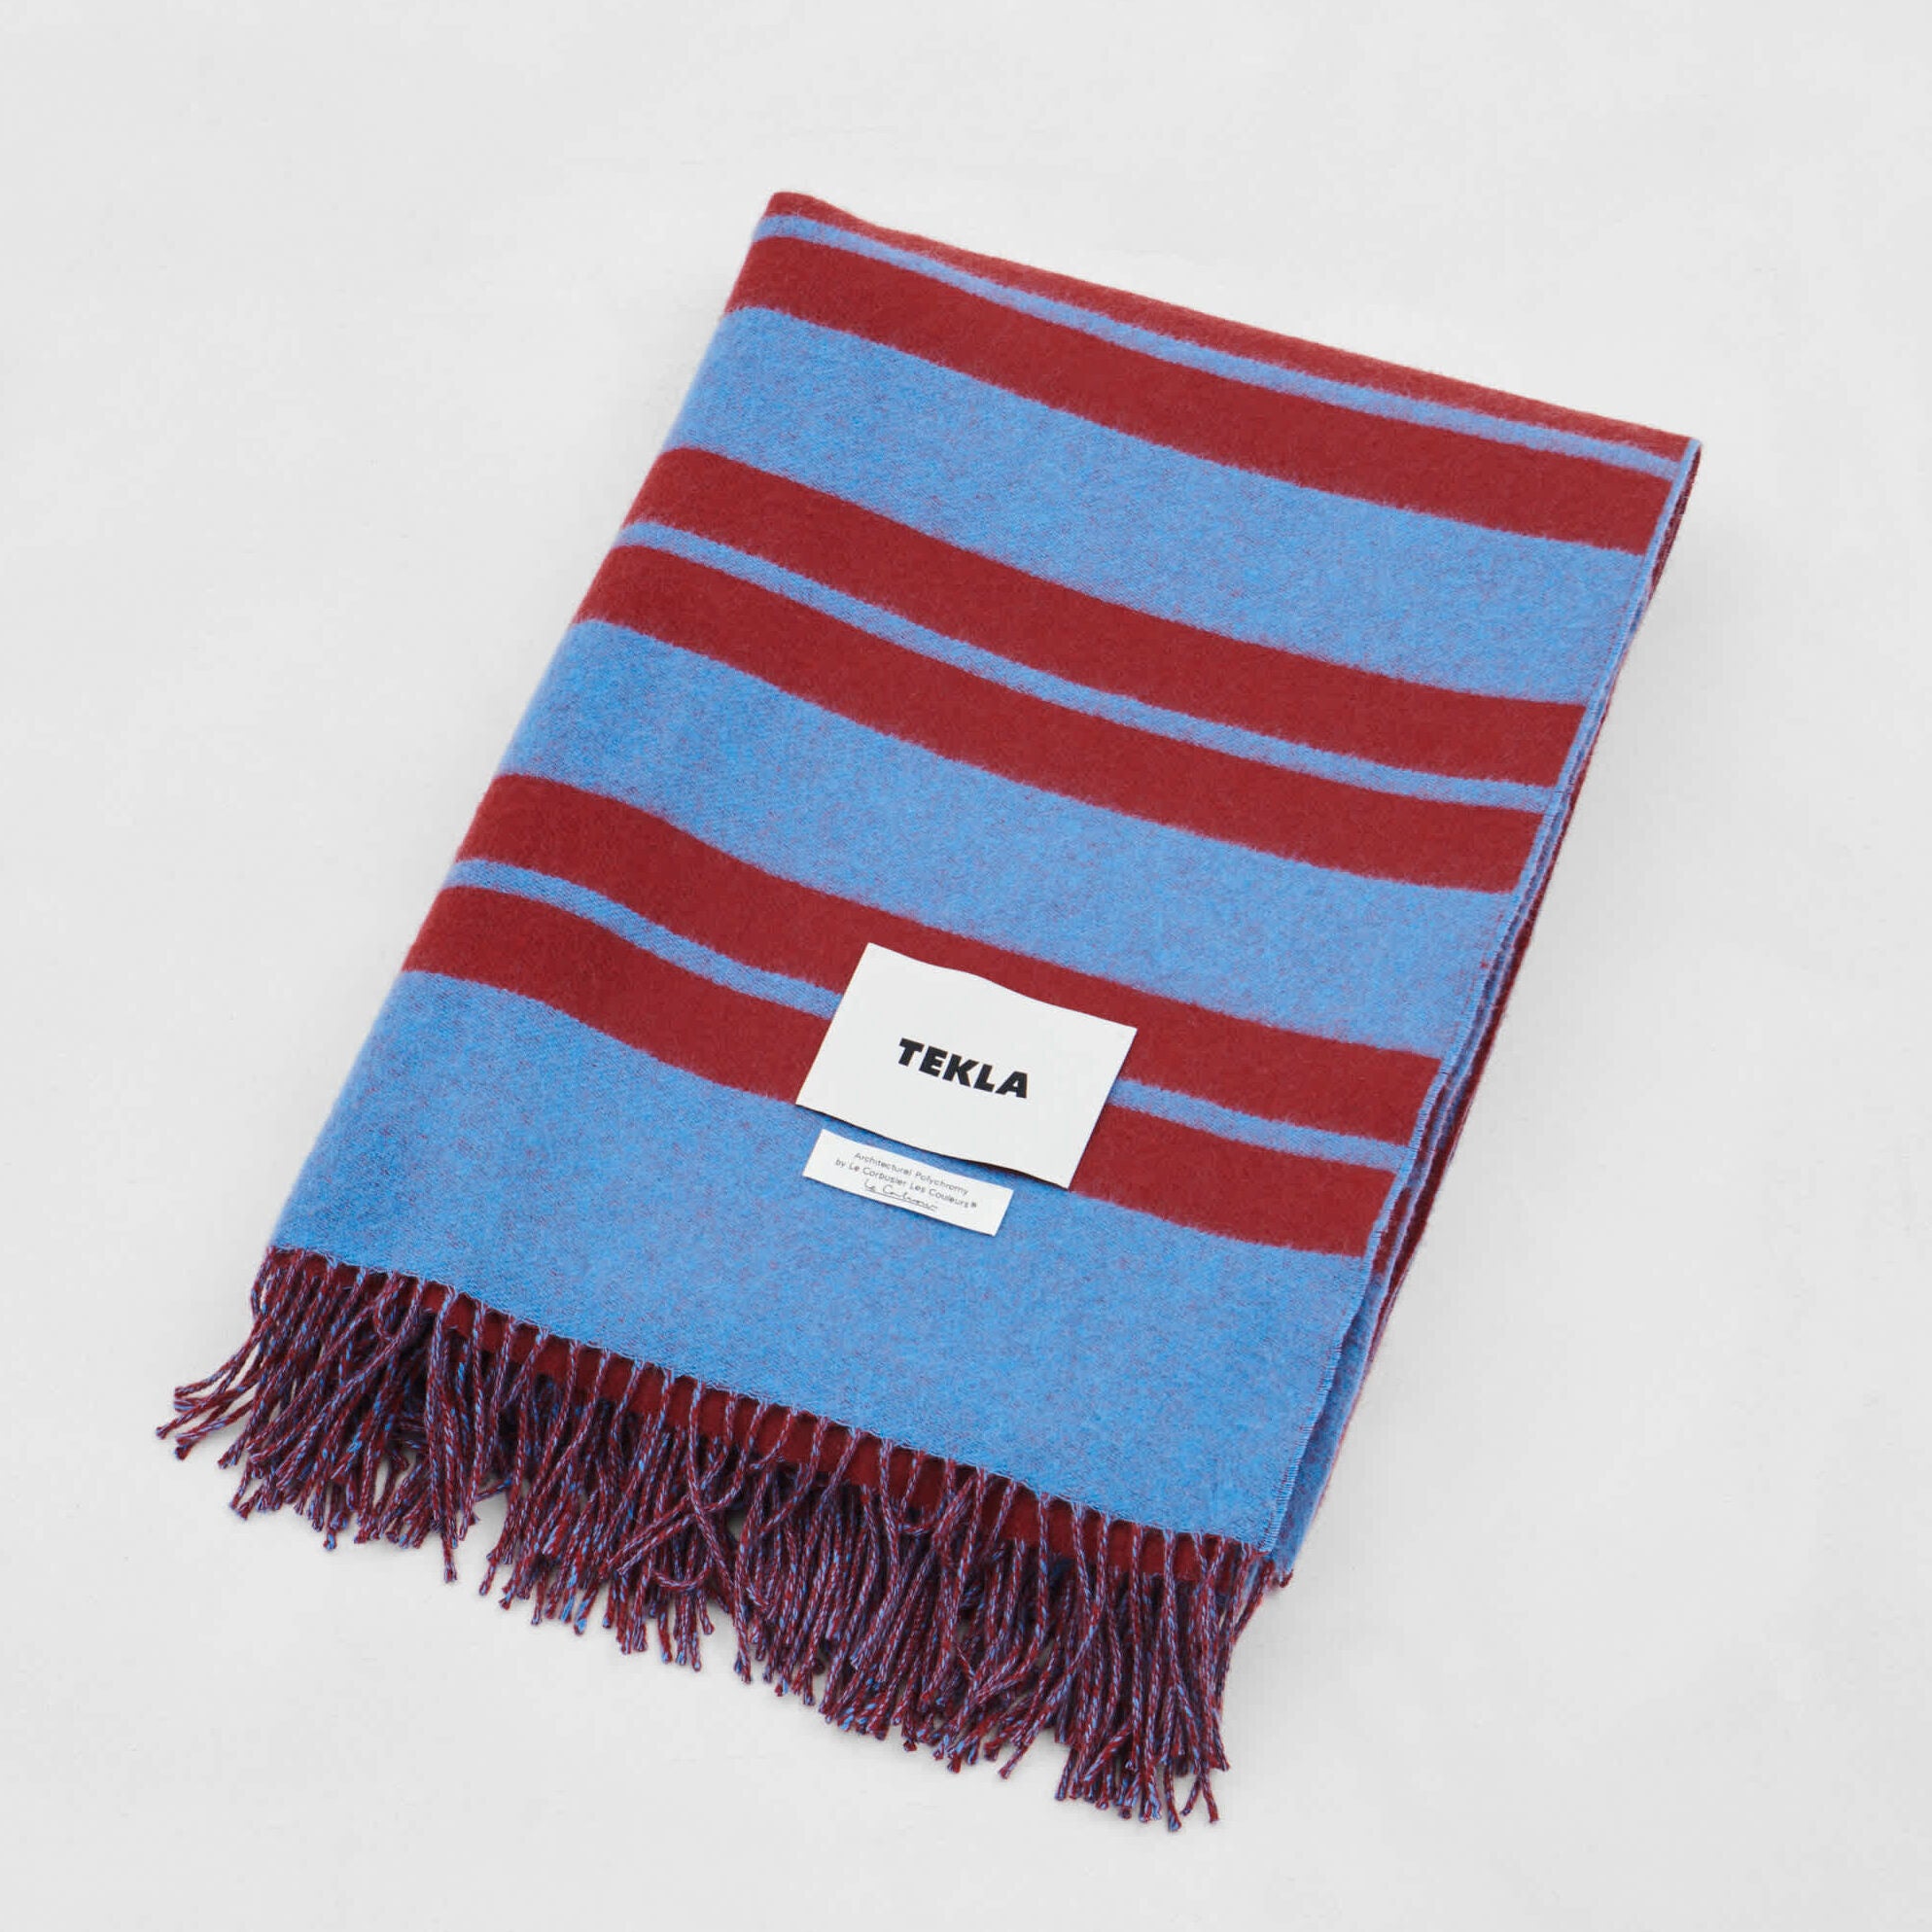 This Le Corbusier–Inspired Blanket Could Single-Handedly Tie Together My Apartment